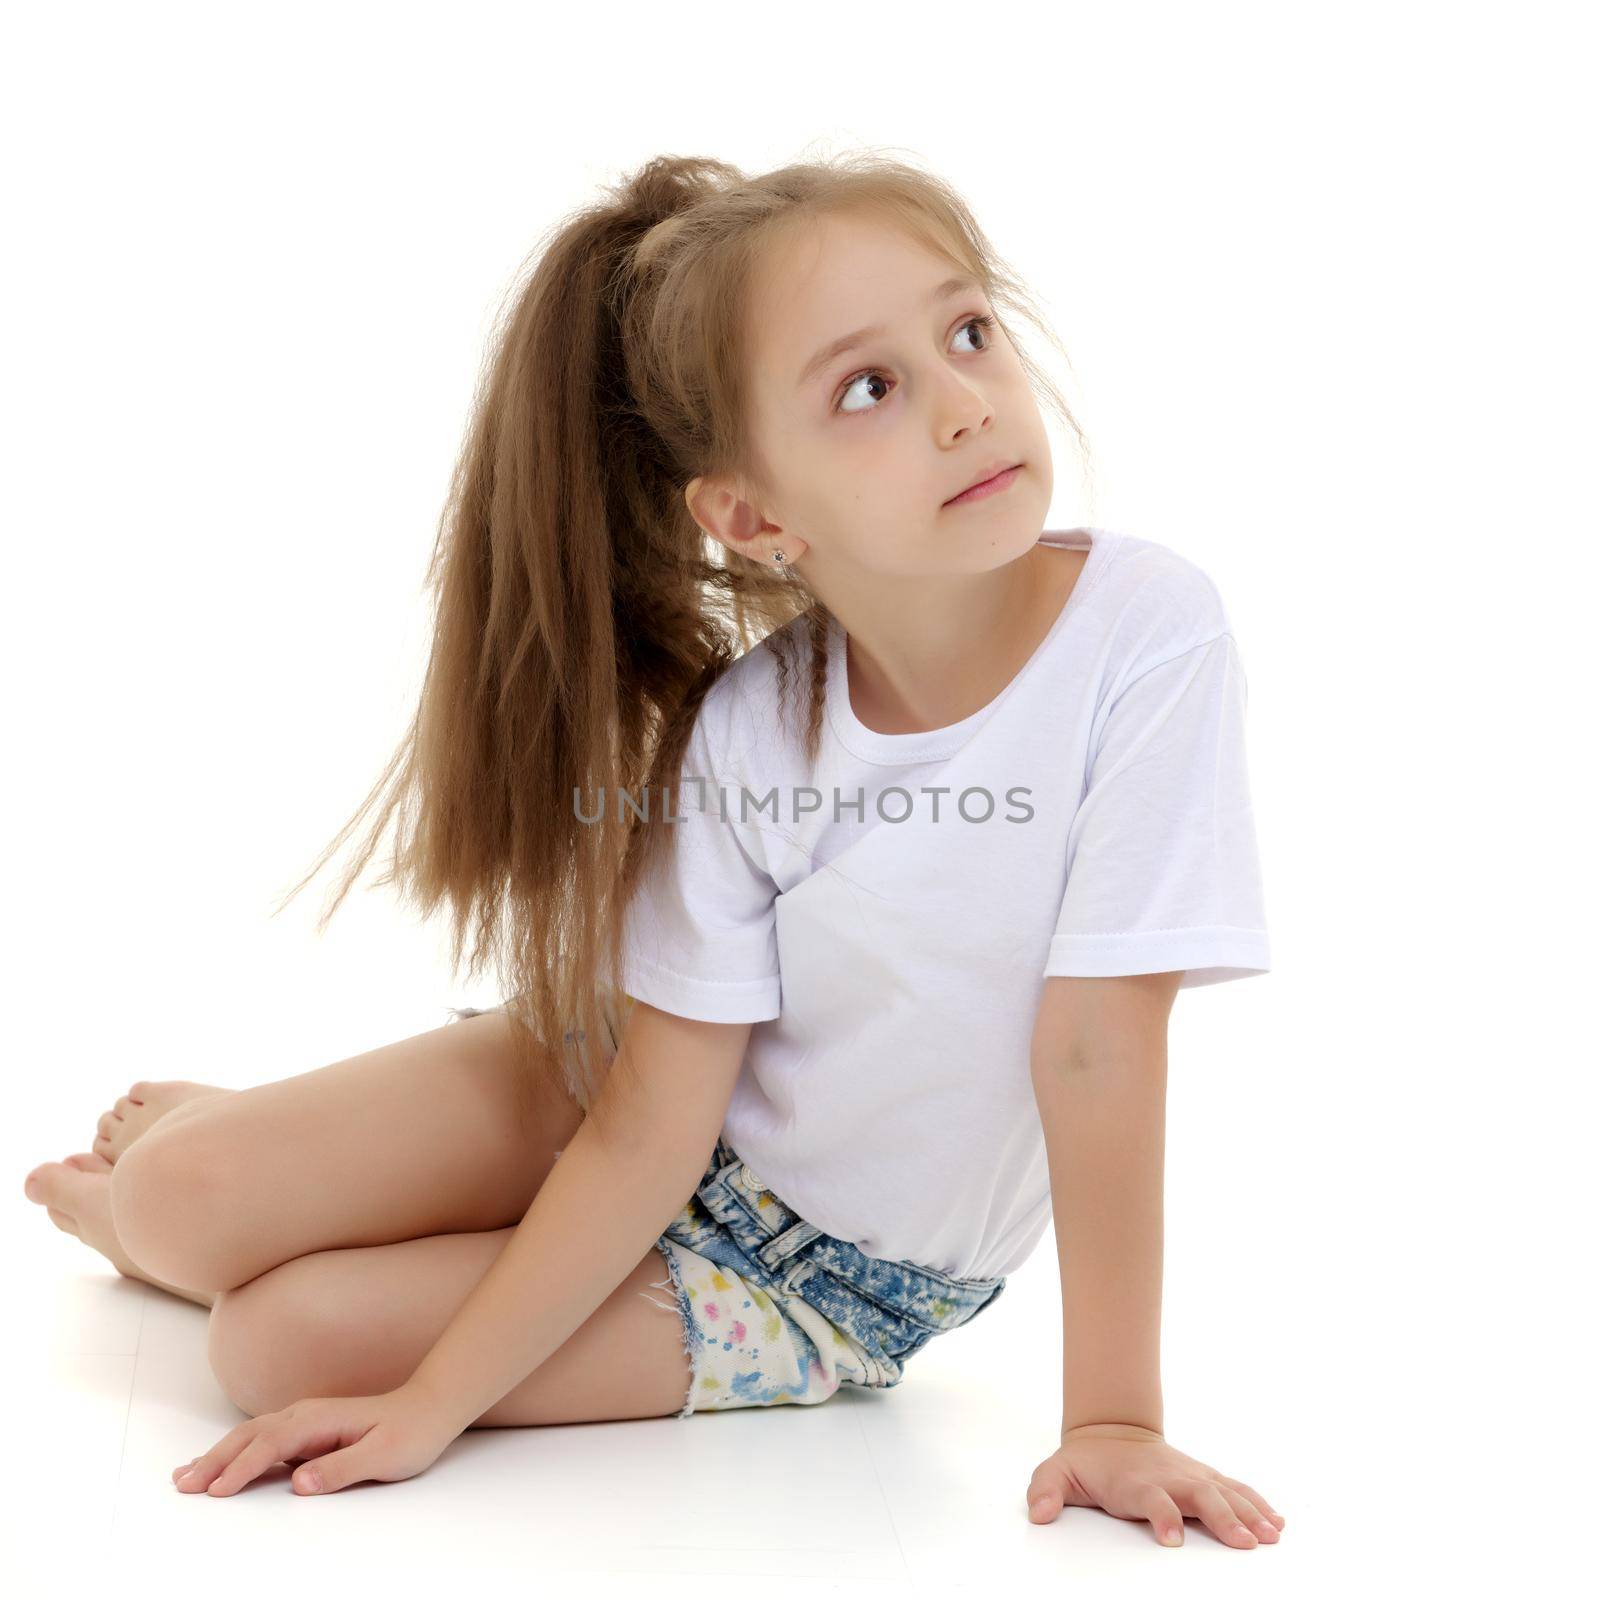 A charming little girl in short shorts and a pure white T-shirt on which you can make any inscription. The concept of advertising, including children's products. Close-up. Isolated on white background.